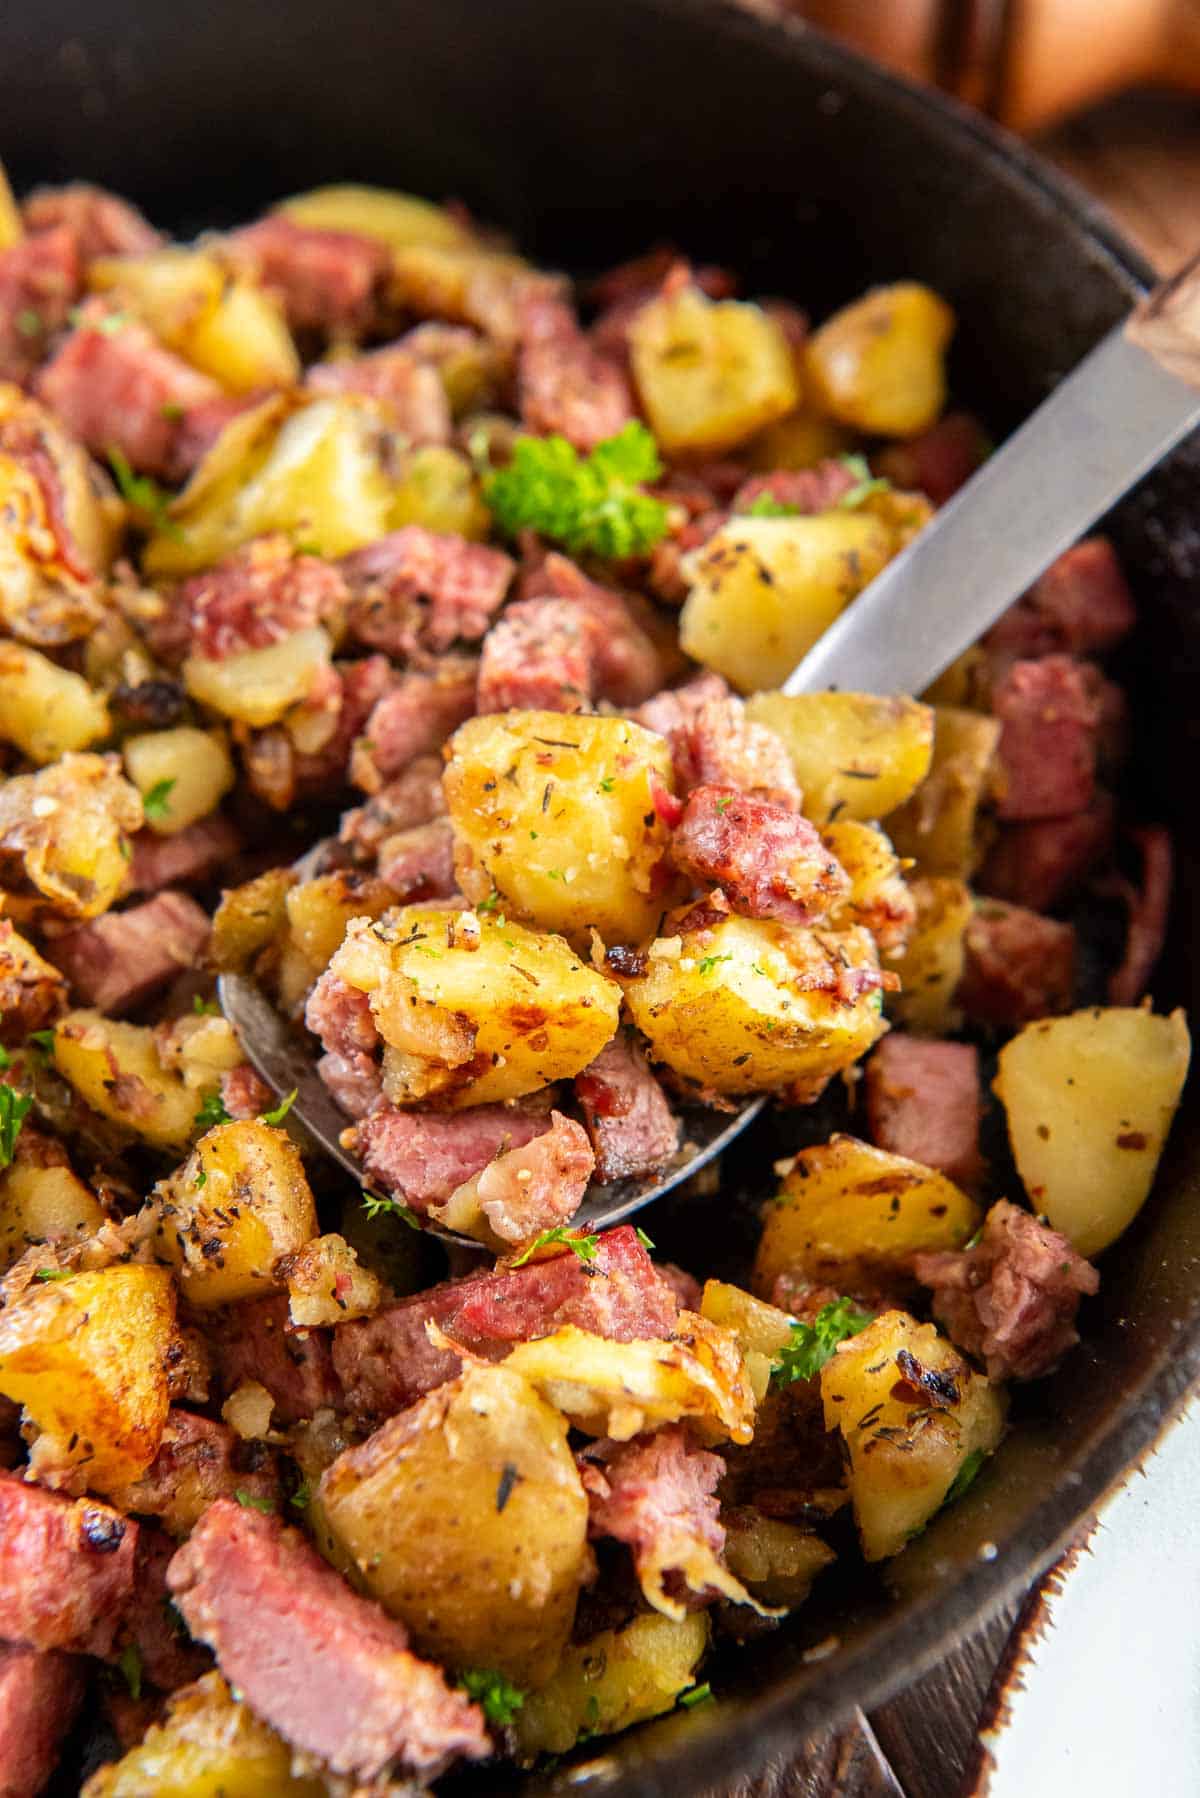 A spoon scooping corned beef hash from a cast iron skillet.